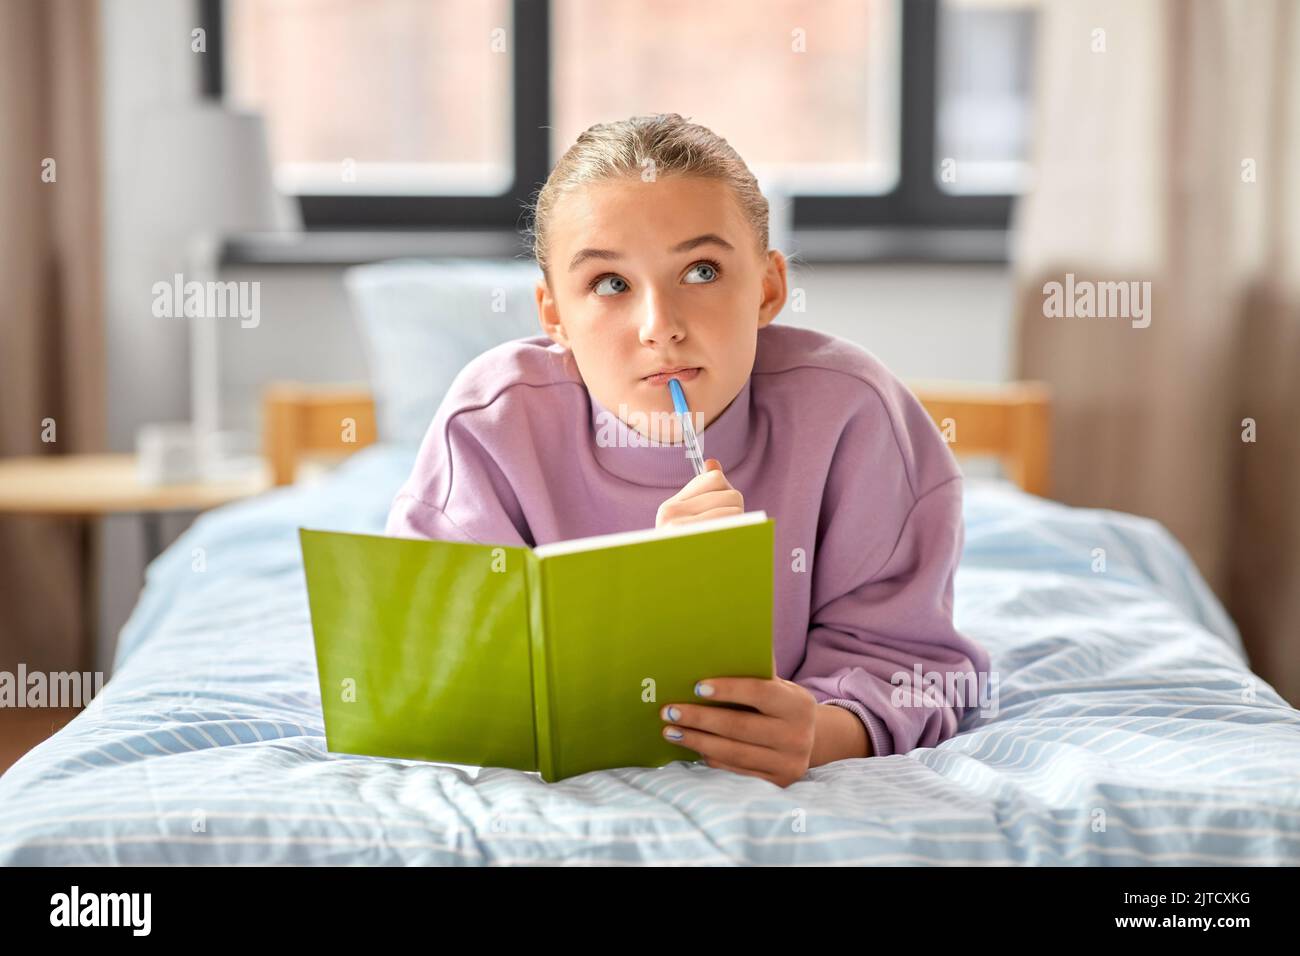 thinking girl with diary lying on bed at home Stock Photo